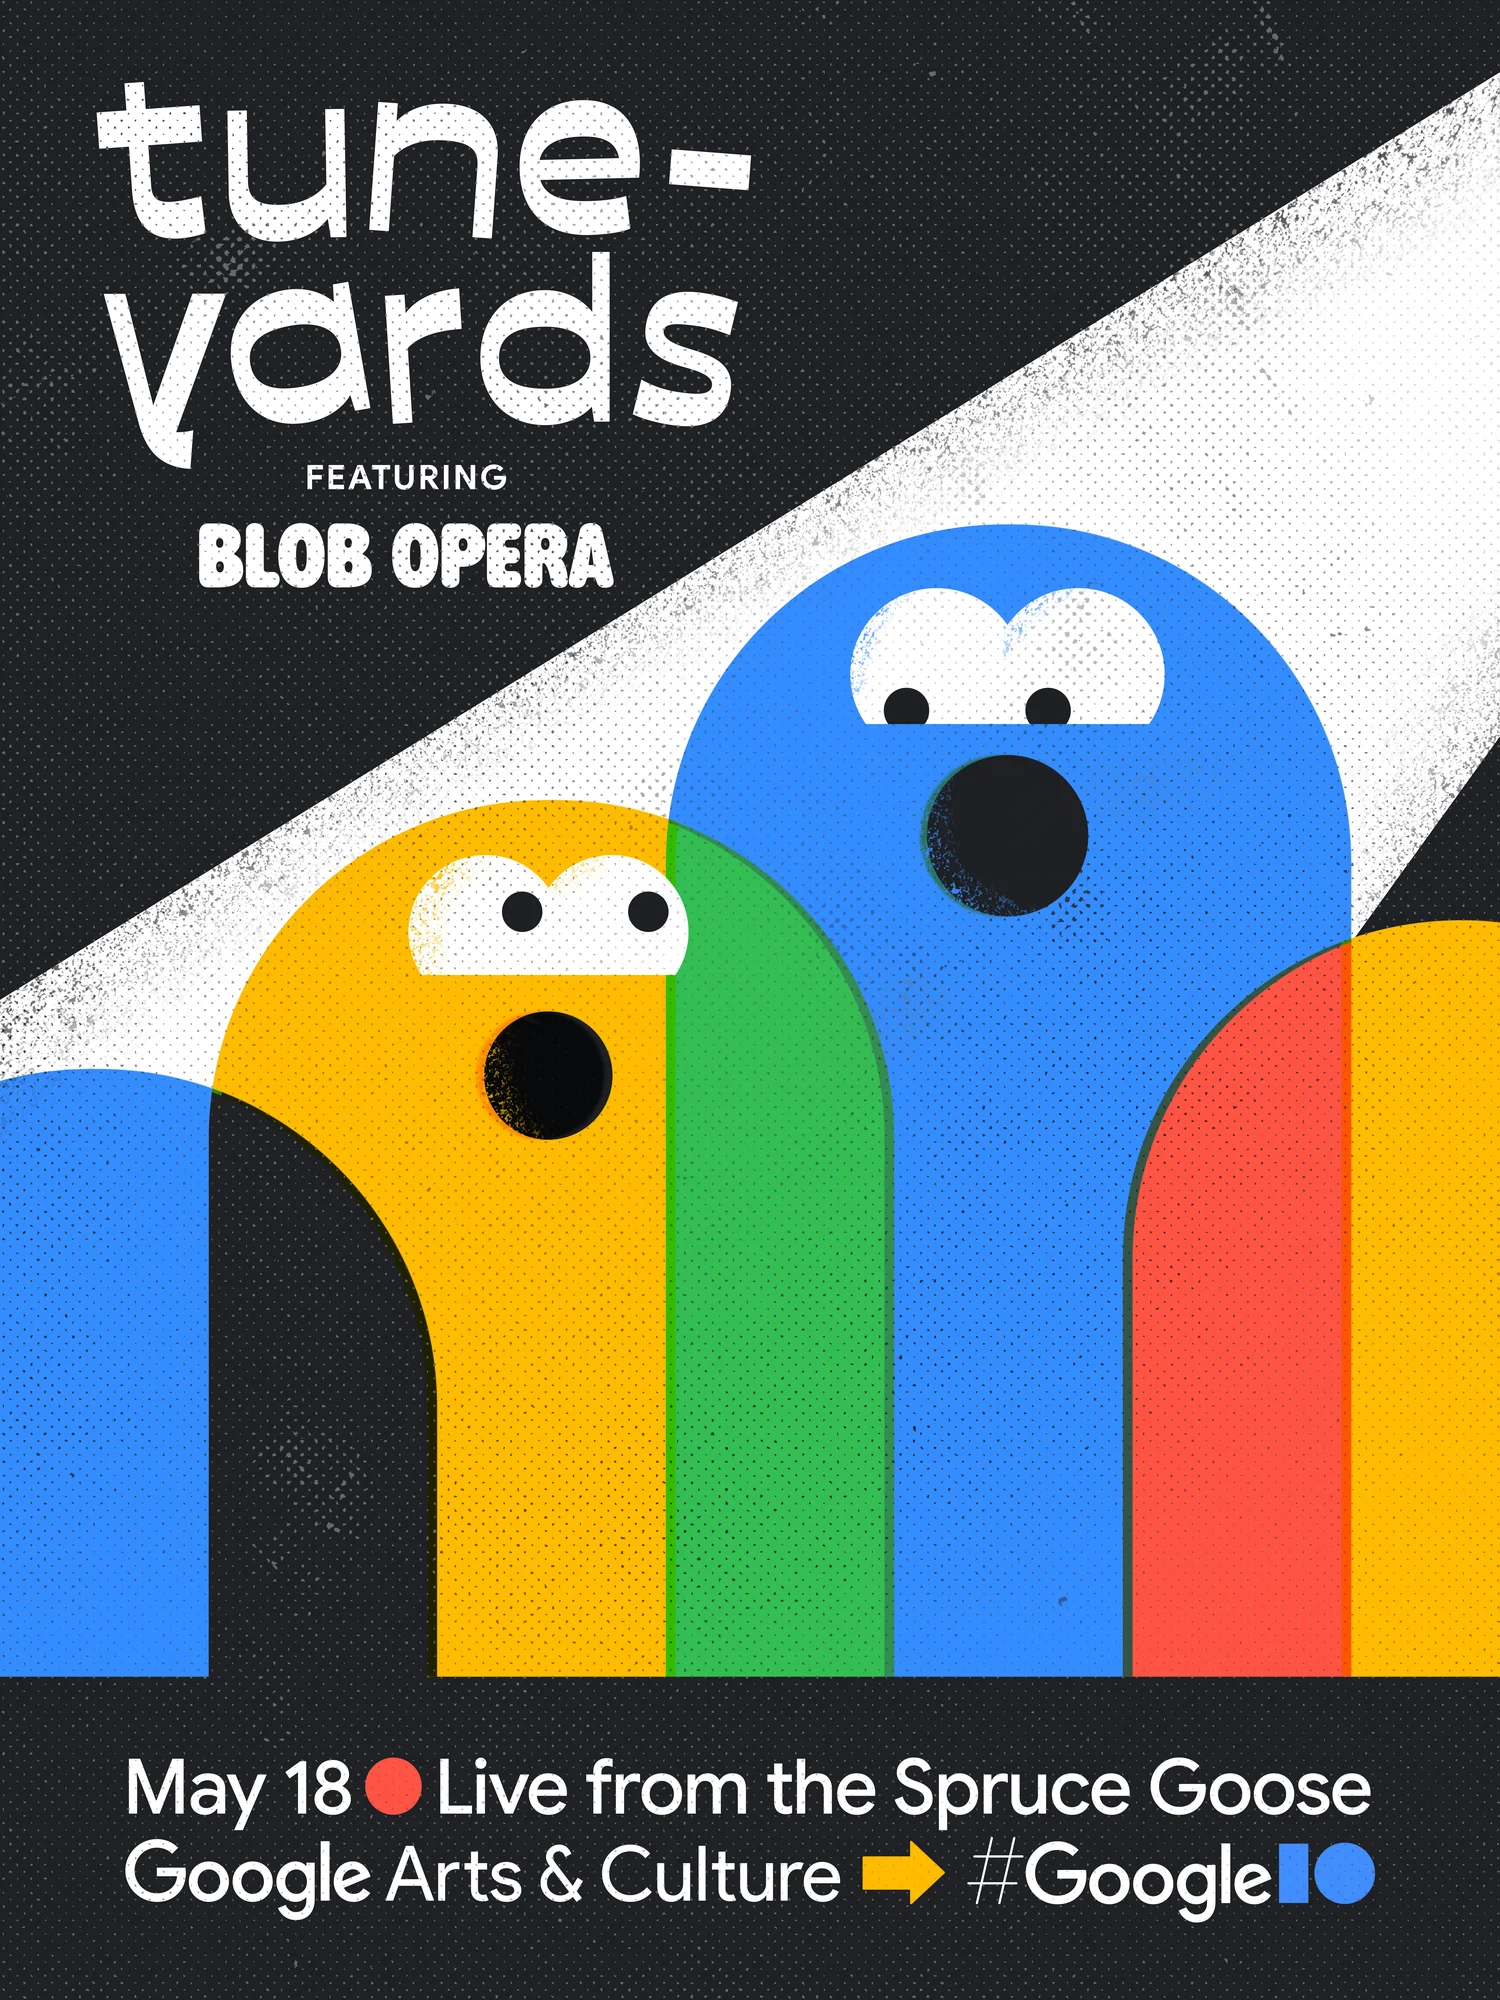 A poster showing 2 blobs and text fields announcing the performance at Google I/O